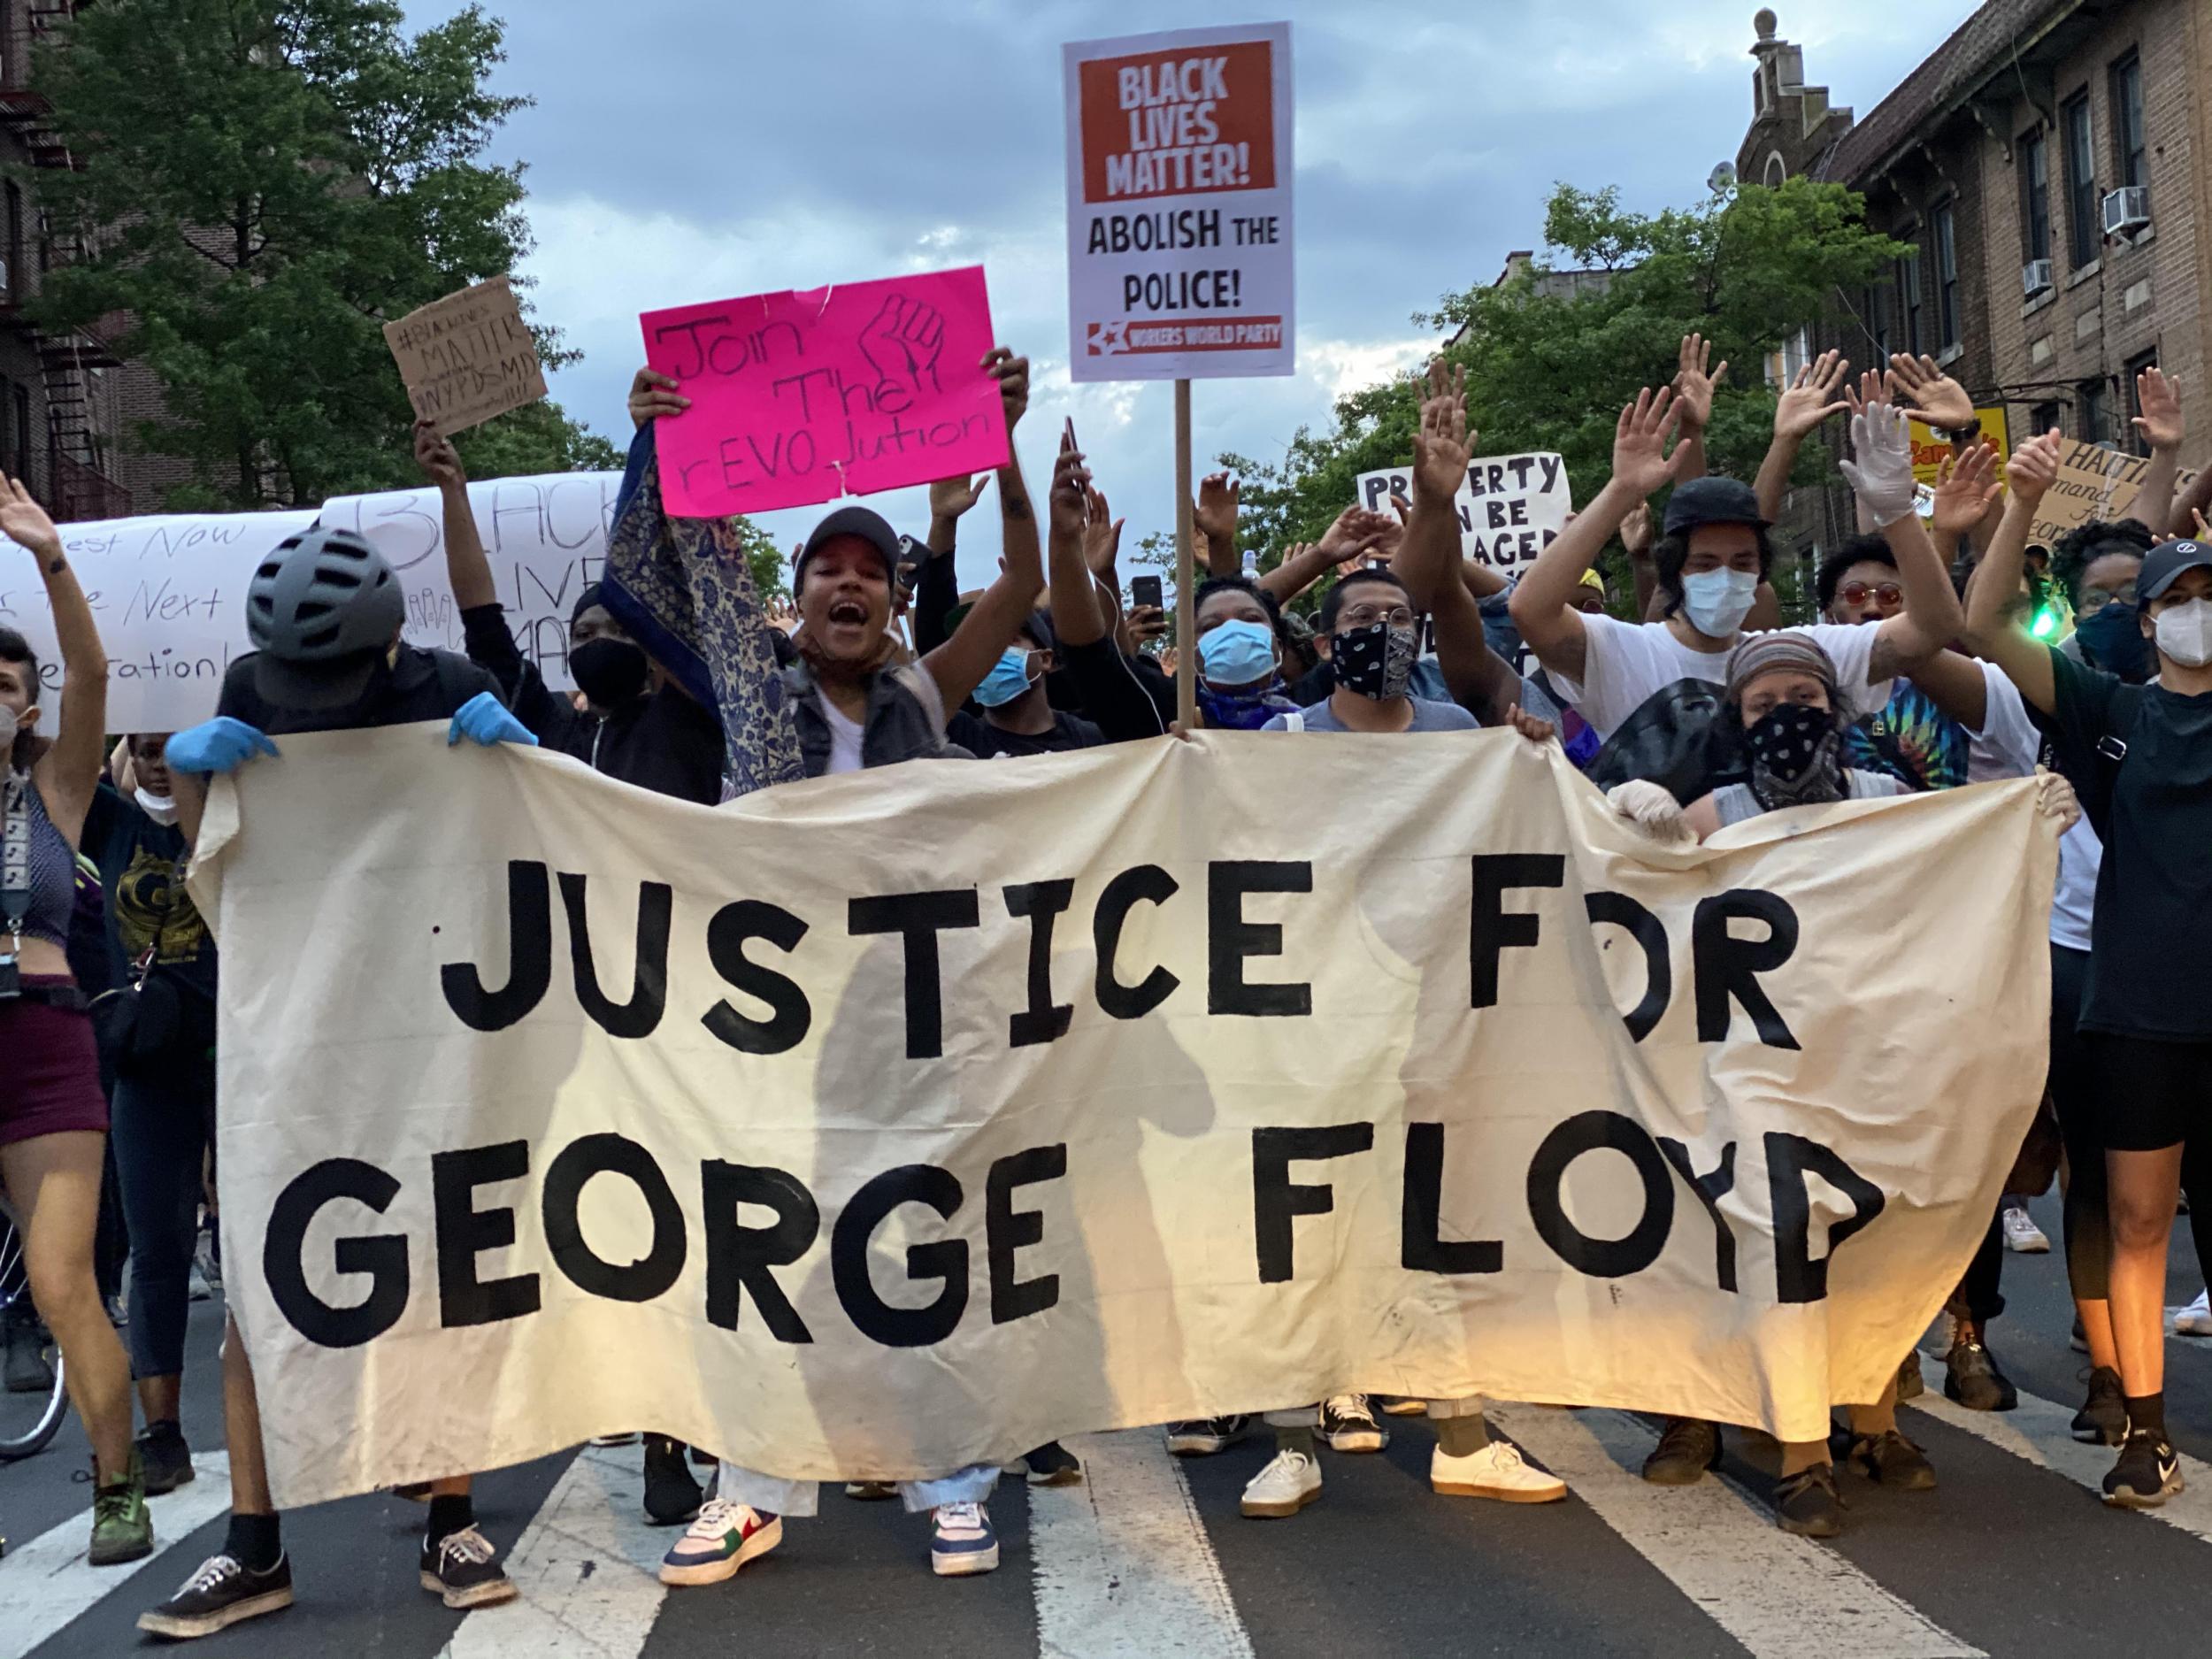 Trump has tried to paint the George Floyd protests as orgies of violence. Here's what they really look like